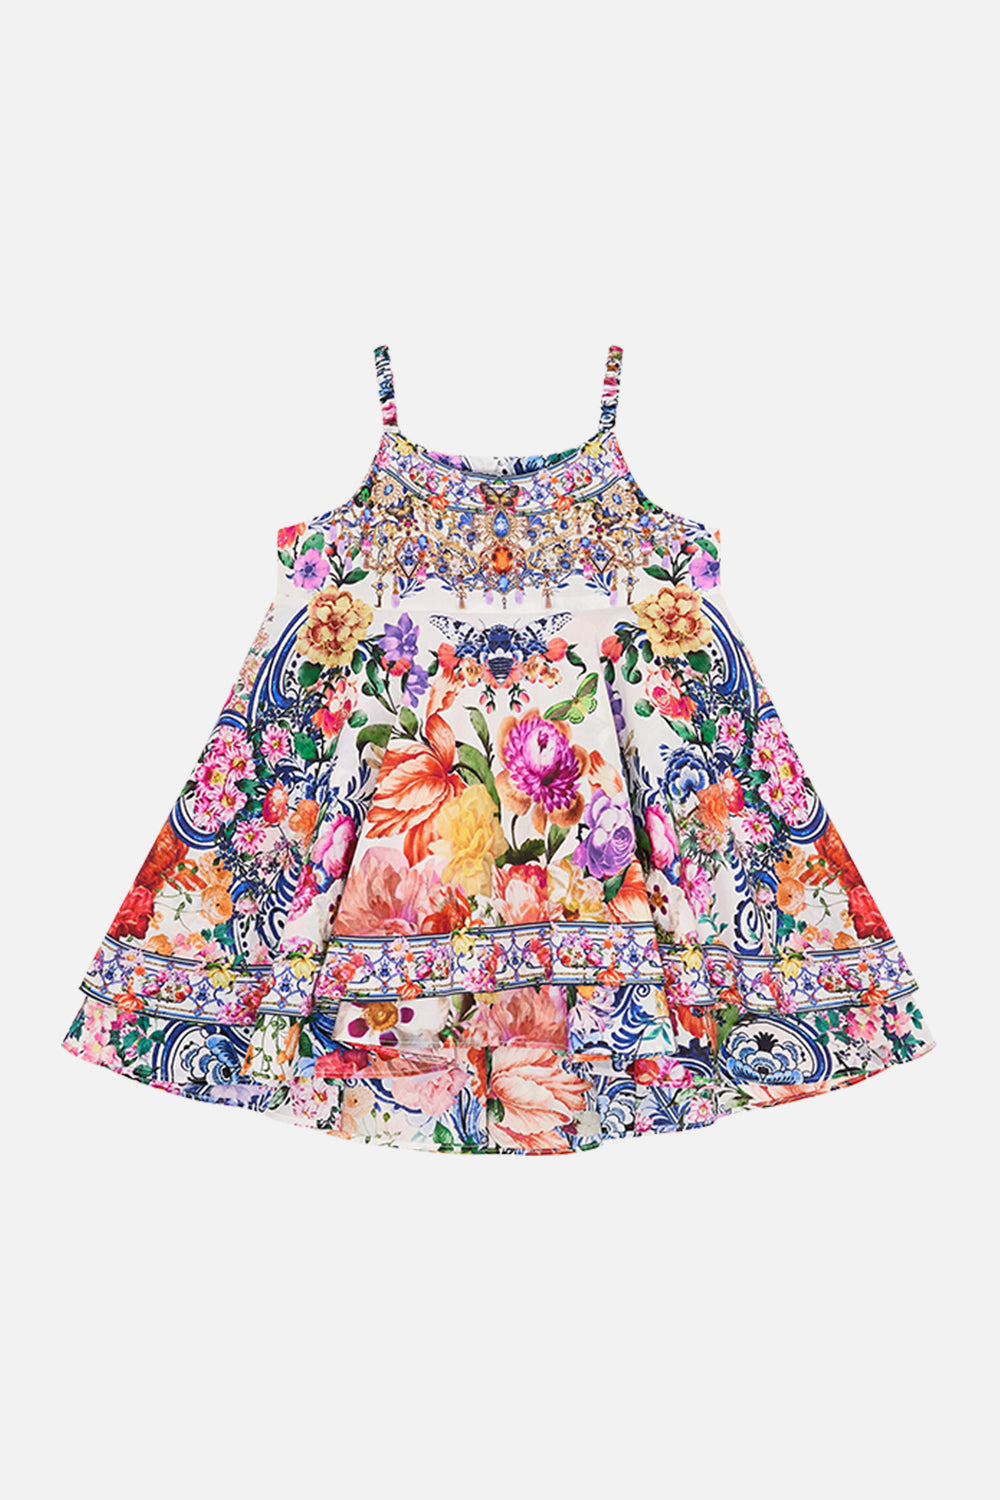 Front product view of zMilla By CAMILLA babies ruffle dress in Dutch is Life print